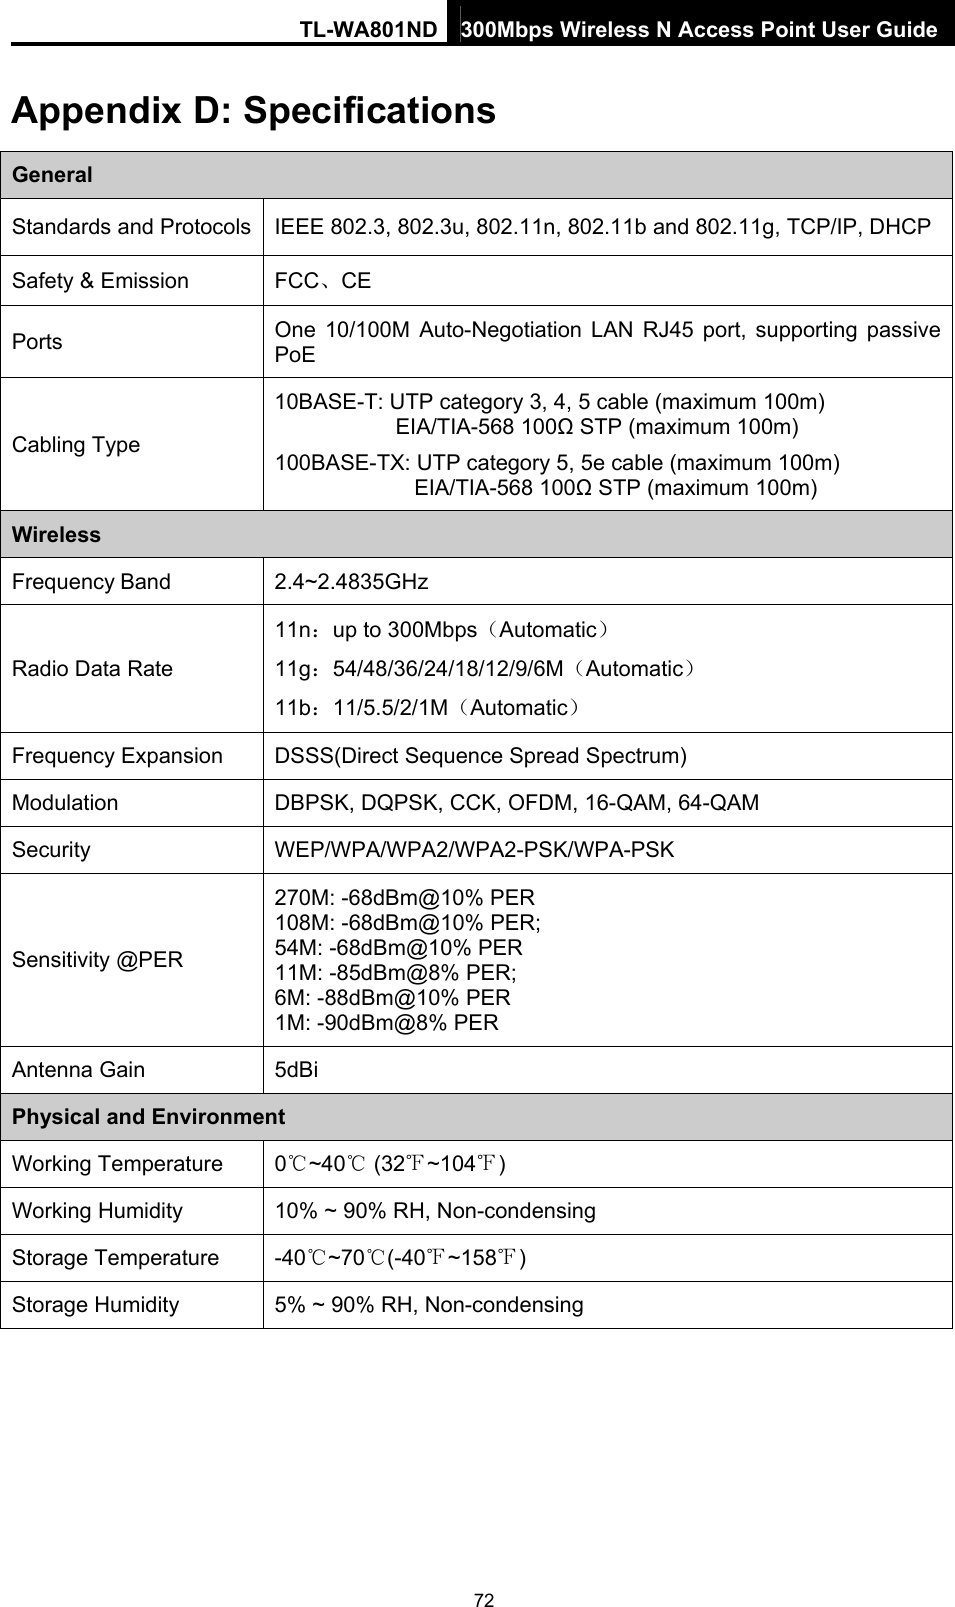 TL-WA801ND 300Mbps Wireless N Access Point User Guide Appendix D: Specifications General Standards and Protocols  IEEE 802.3, 802.3u, 802.11n, 802.11b and 802.11g, TCP/IP, DHCP Safety &amp; Emission  FCC、CE Ports  One 10/100M Auto-Negotiation LAN RJ45 port, supporting passive PoE Cabling Type 10BASE-T: UTP category 3, 4, 5 cable (maximum 100m) EIA/TIA-568 100Ω STP (maximum 100m) 100BASE-TX: UTP category 5, 5e cable (maximum 100m) EIA/TIA-568 100Ω STP (maximum 100m) Wireless Frequency Band 2.4~2.4835GHz Radio Data Rate 11n：up to 300Mbps（Automatic） 11g：54/48/36/24/18/12/9/6M（Automatic） 11b：11/5.5/2/1M（Automatic） Frequency Expansion  DSSS(Direct Sequence Spread Spectrum) Modulation  DBPSK, DQPSK, CCK, OFDM, 16-QAM, 64-QAM Security WEP/WPA/WPA2/WPA2-PSK/WPA-PSK Sensitivity @PER 270M: -68dBm@10% PER 108M: -68dBm@10% PER;   54M: -68dBm@10% PER 11M: -85dBm@8% PER;   6M: -88dBm@10% PER 1M: -90dBm@8% PER Antenna Gain  5dBi Physical and Environment Working Temperature 0℃~40  (32℃~104℉℉) Working Humidity  10% ~ 90% RH, Non-condensing Storage Temperature  -40 ~70 (℃℃-40 ~158℉)℉ Storage Humidity  5% ~ 90% RH, Non-condensing  72 